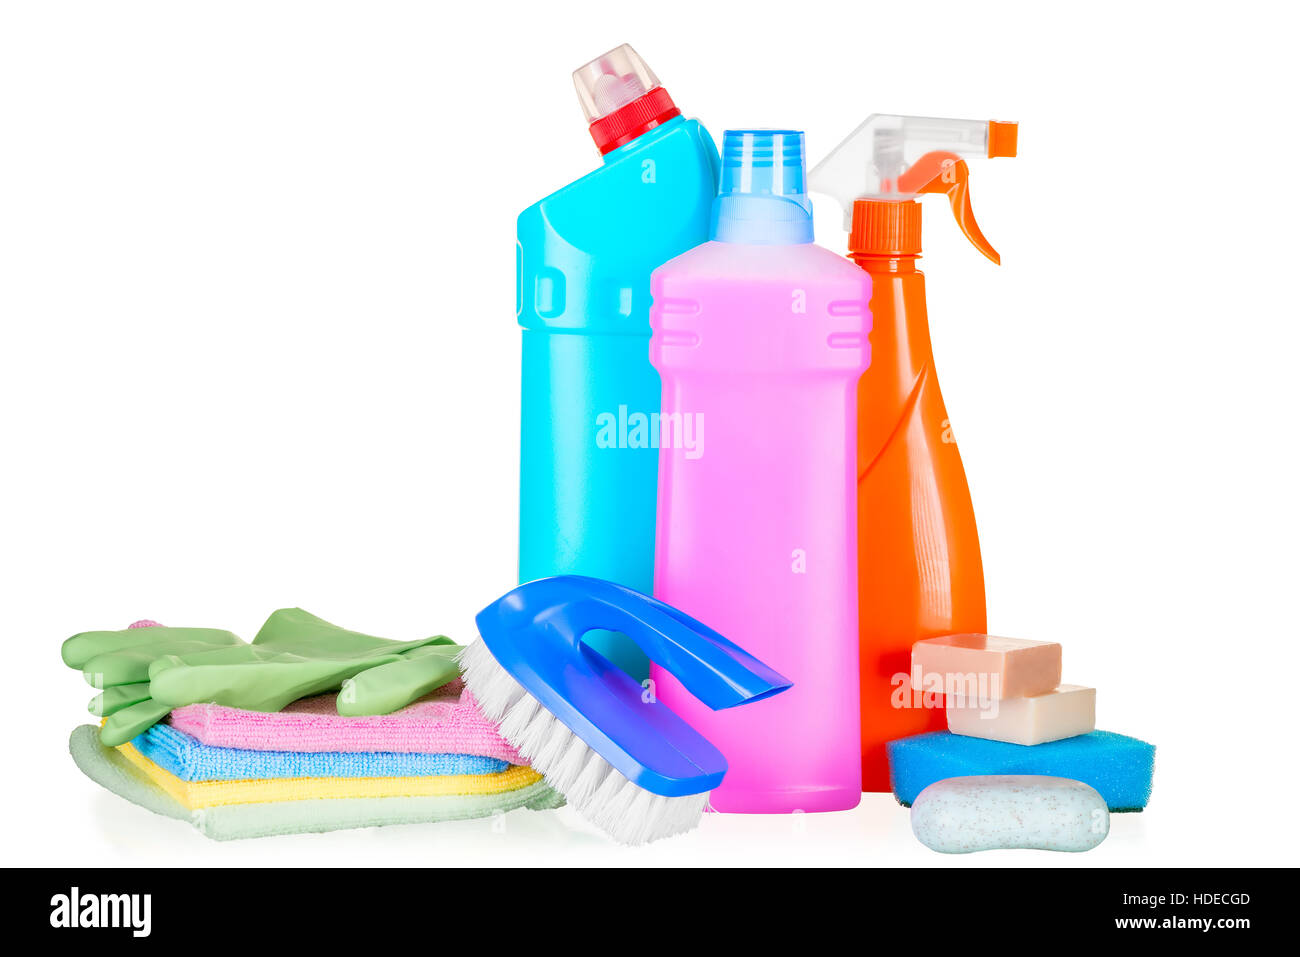 Cleaning Items Isolated On White Stock Photo, Picture and Royalty Free  Image. Image 14455485.